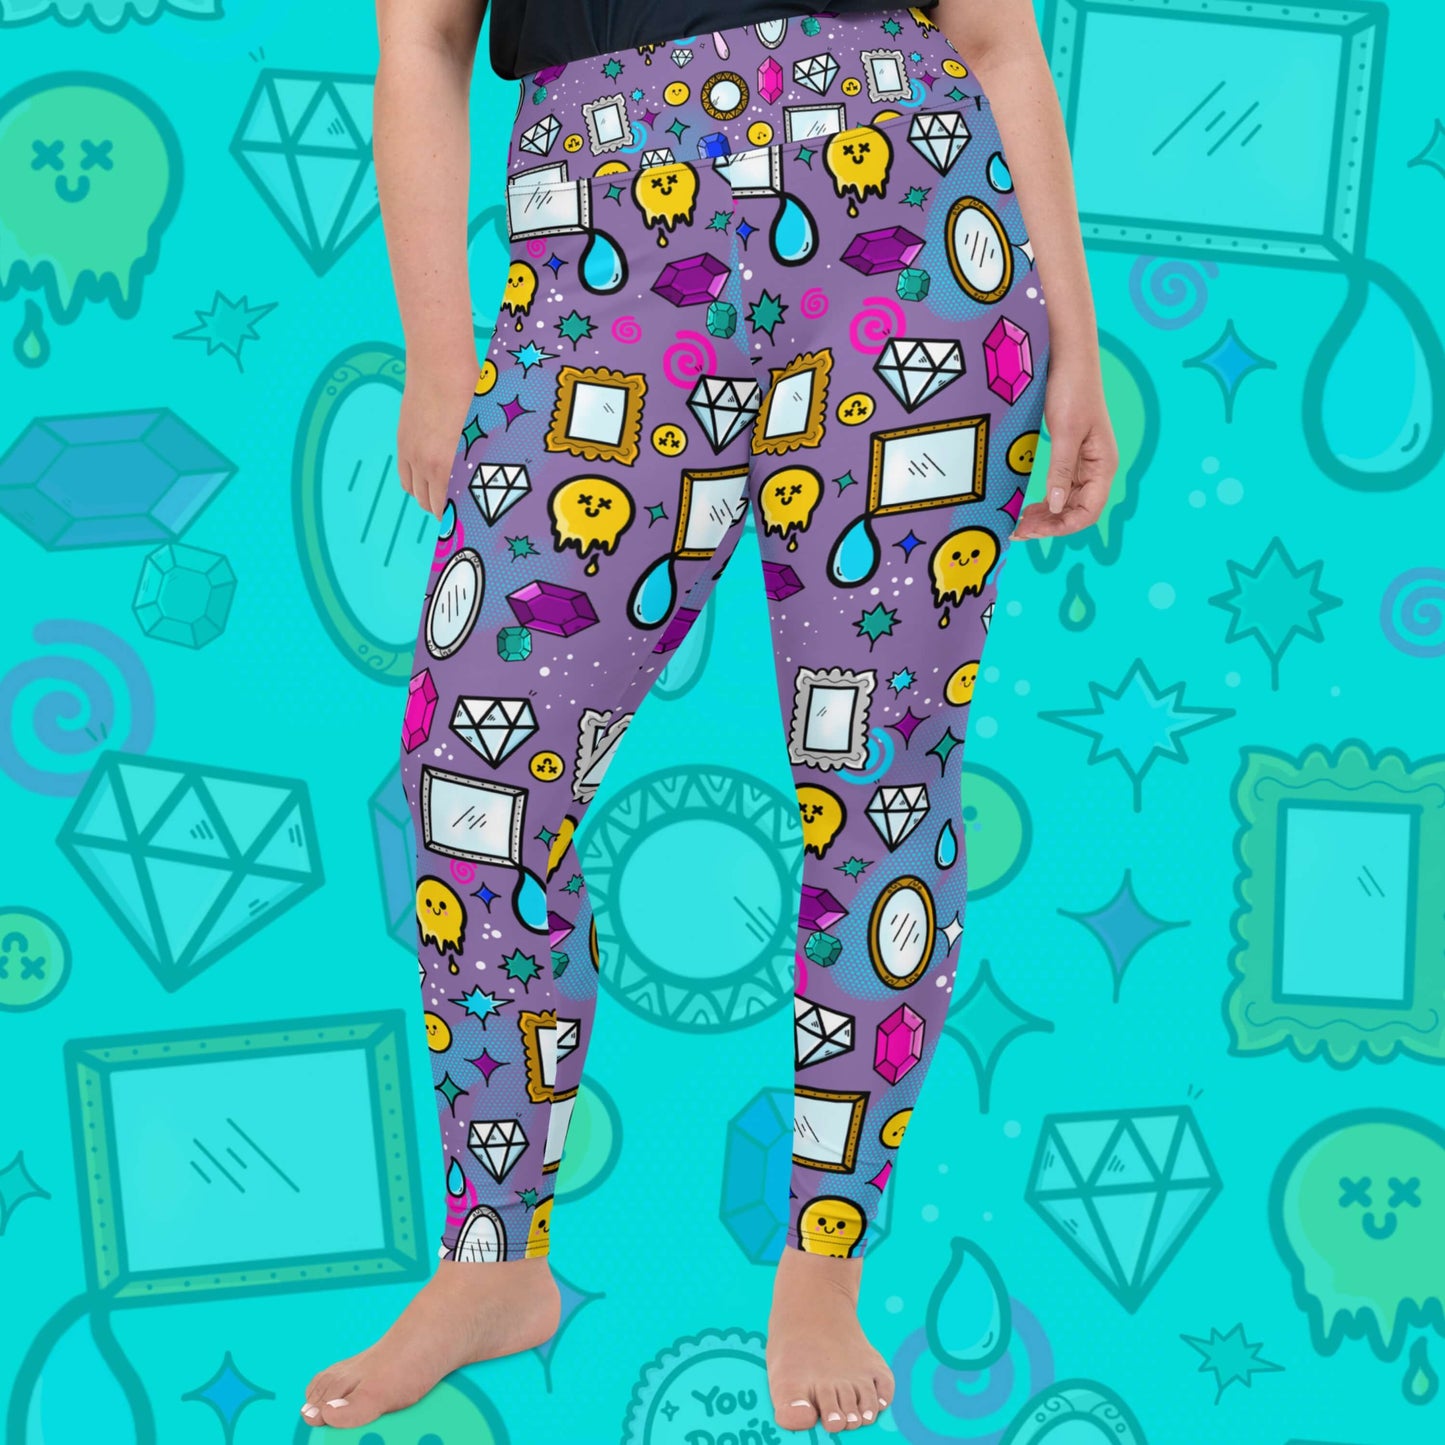 The You Don't Look Sick Plus Size Leggings modelled by a femme person wearing a black tee on a blue background with a faded version of the print. The purple base leggings features melting yellow smiley faces, mirrors, gemstones, teardrops, sparkles, swirls and dots with a centre hand held mirror reading 'you don't look sick'. The hand drawn design is raising awareness for invisible illnesses.